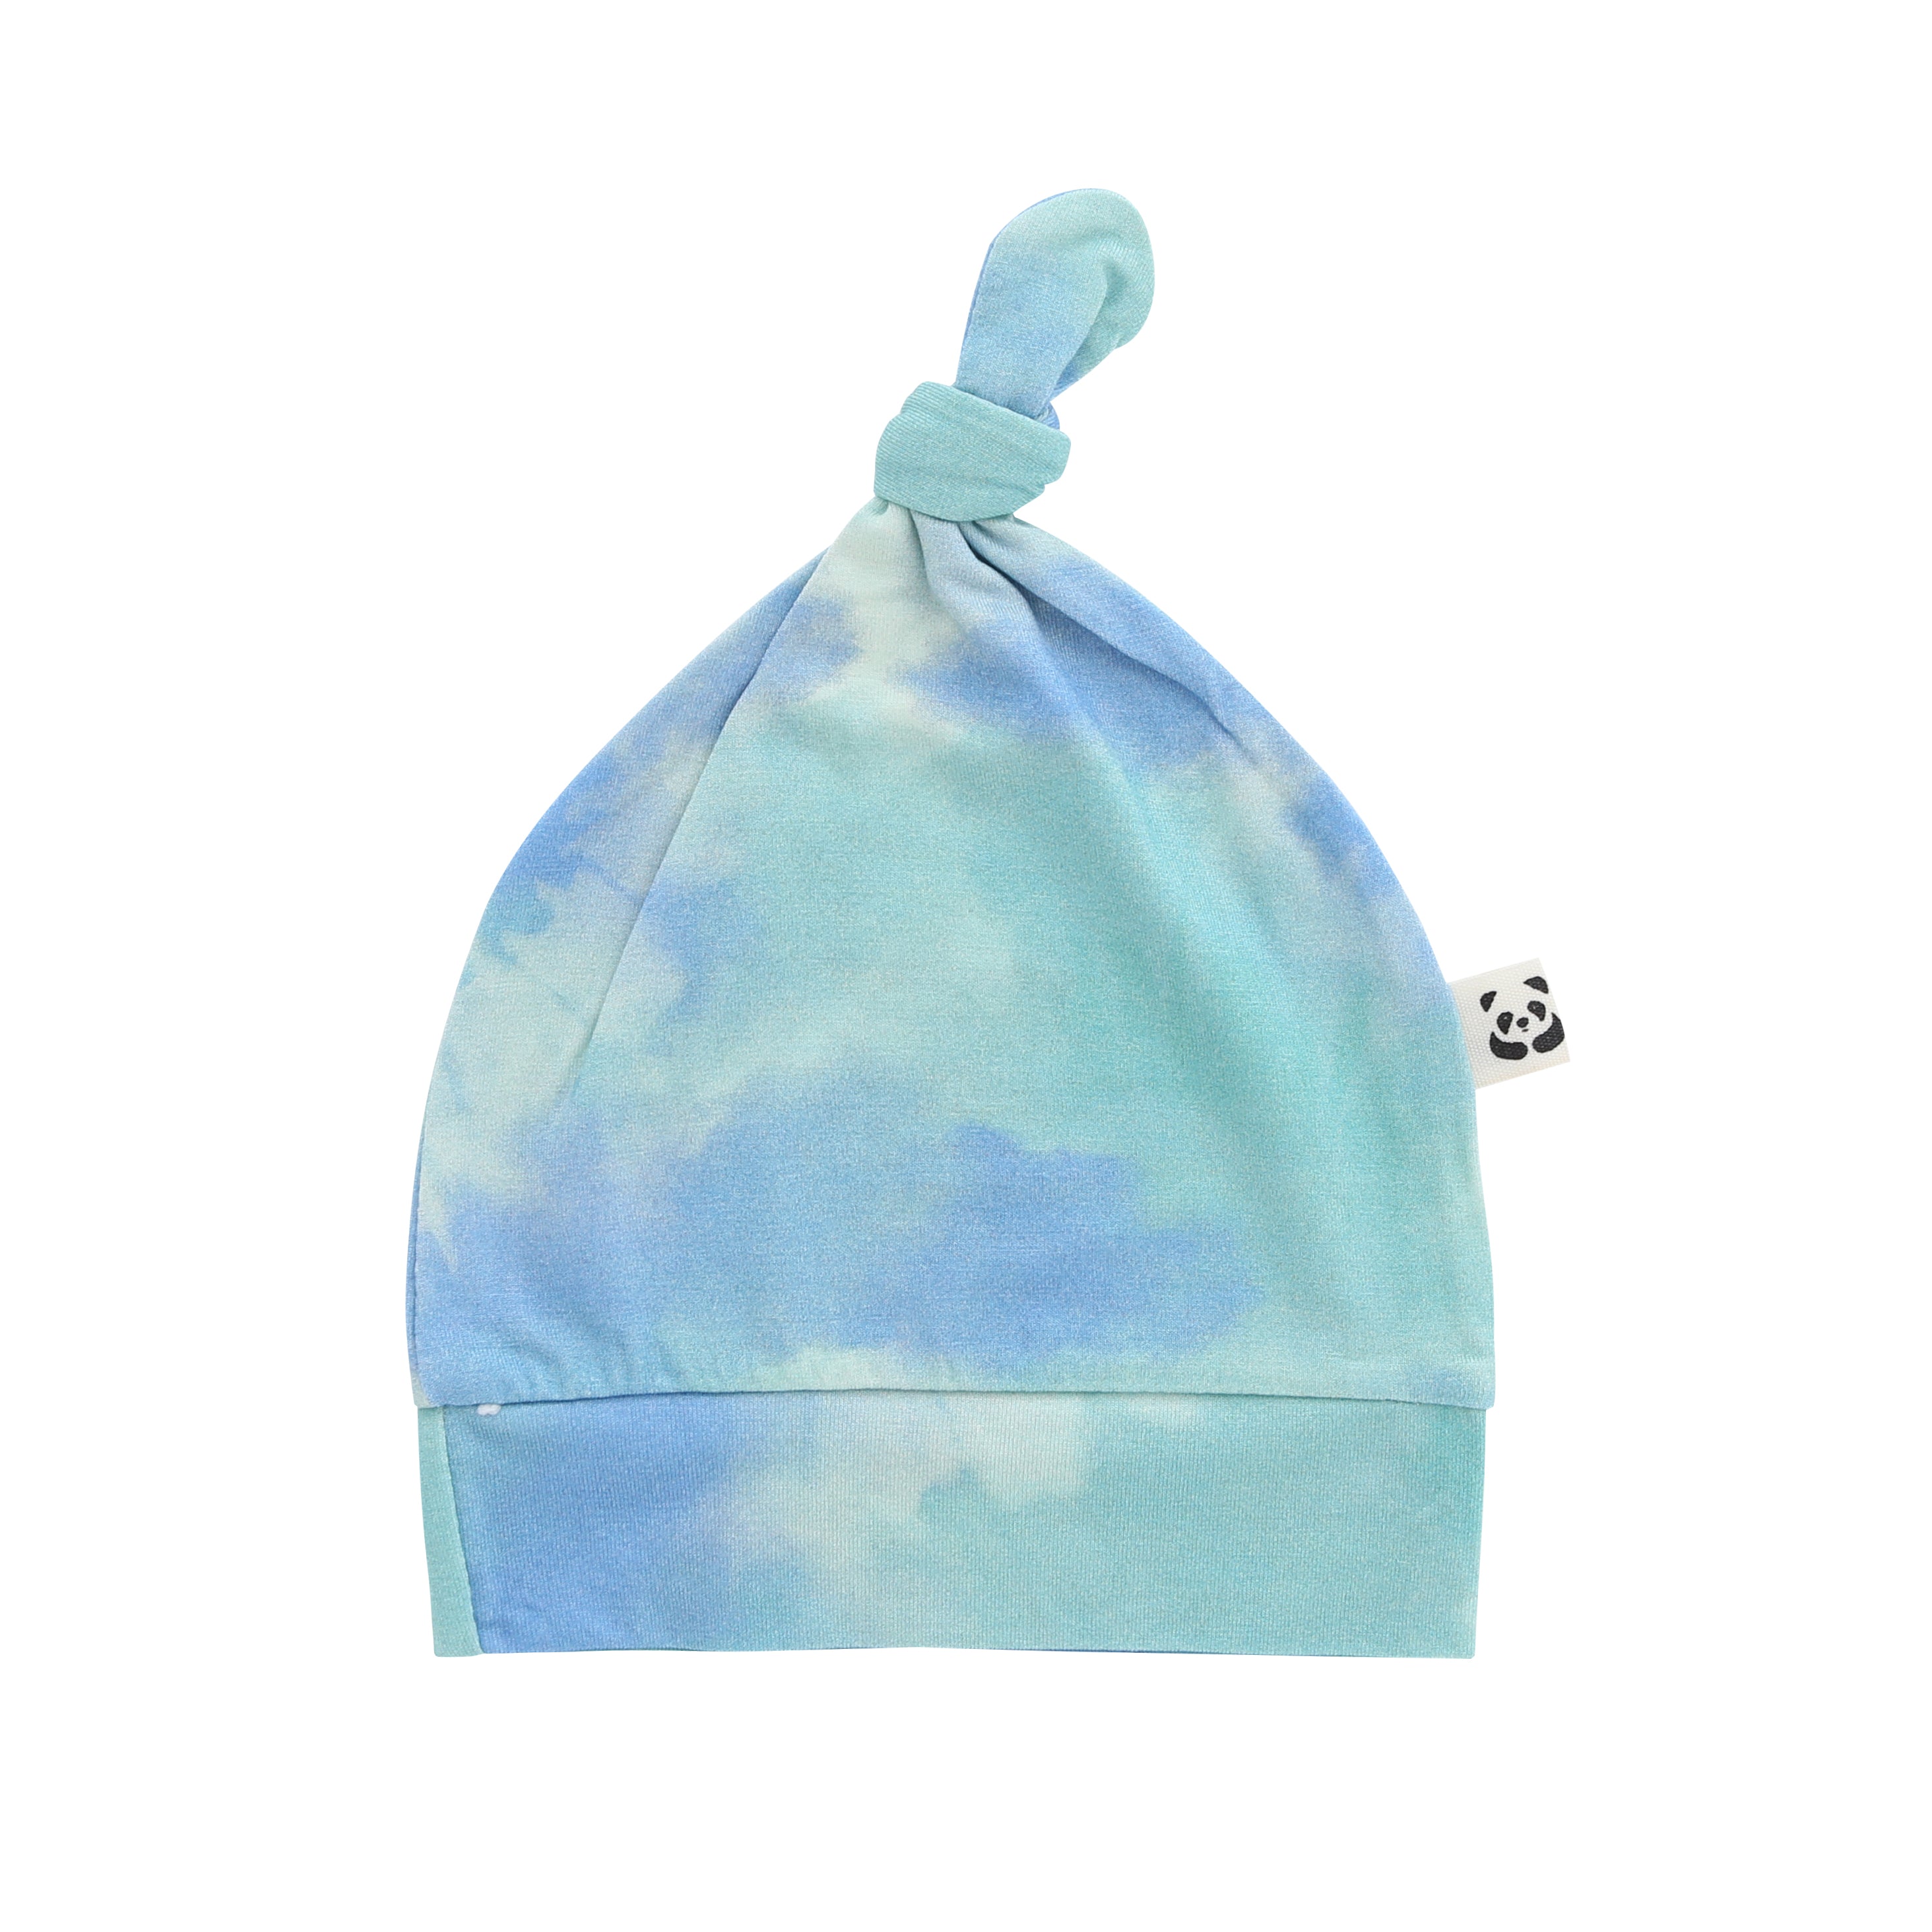 Knotted Hat, Blue Crumple Tie-Dye